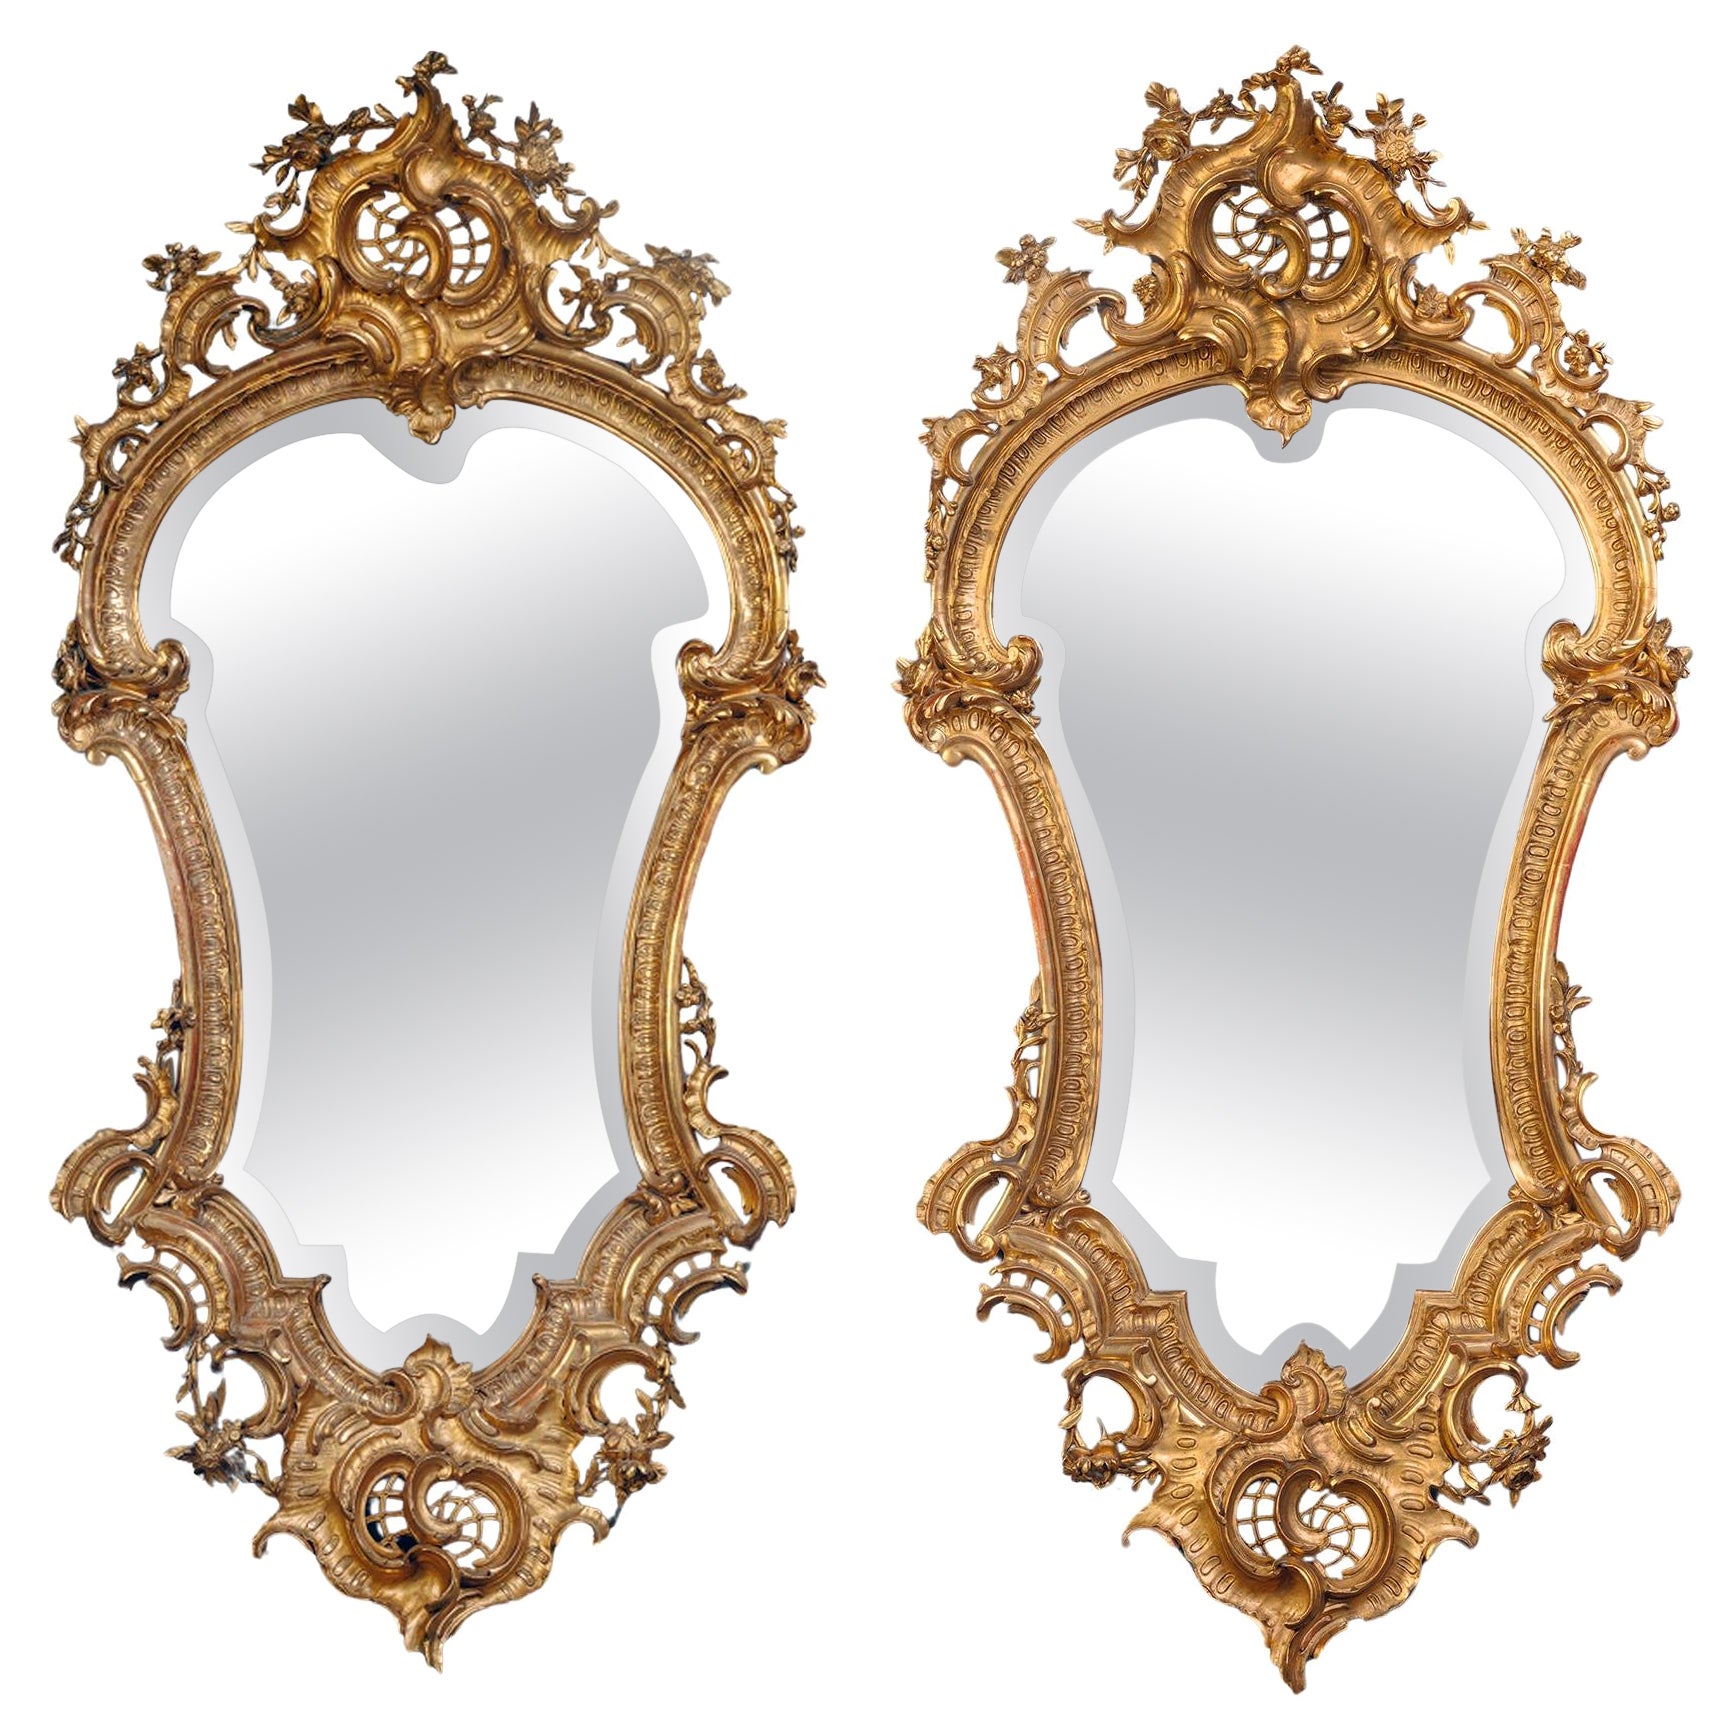 Large Pair of Florentine Cartouche-Shaped Giltwood Wall Mirrors For Sale